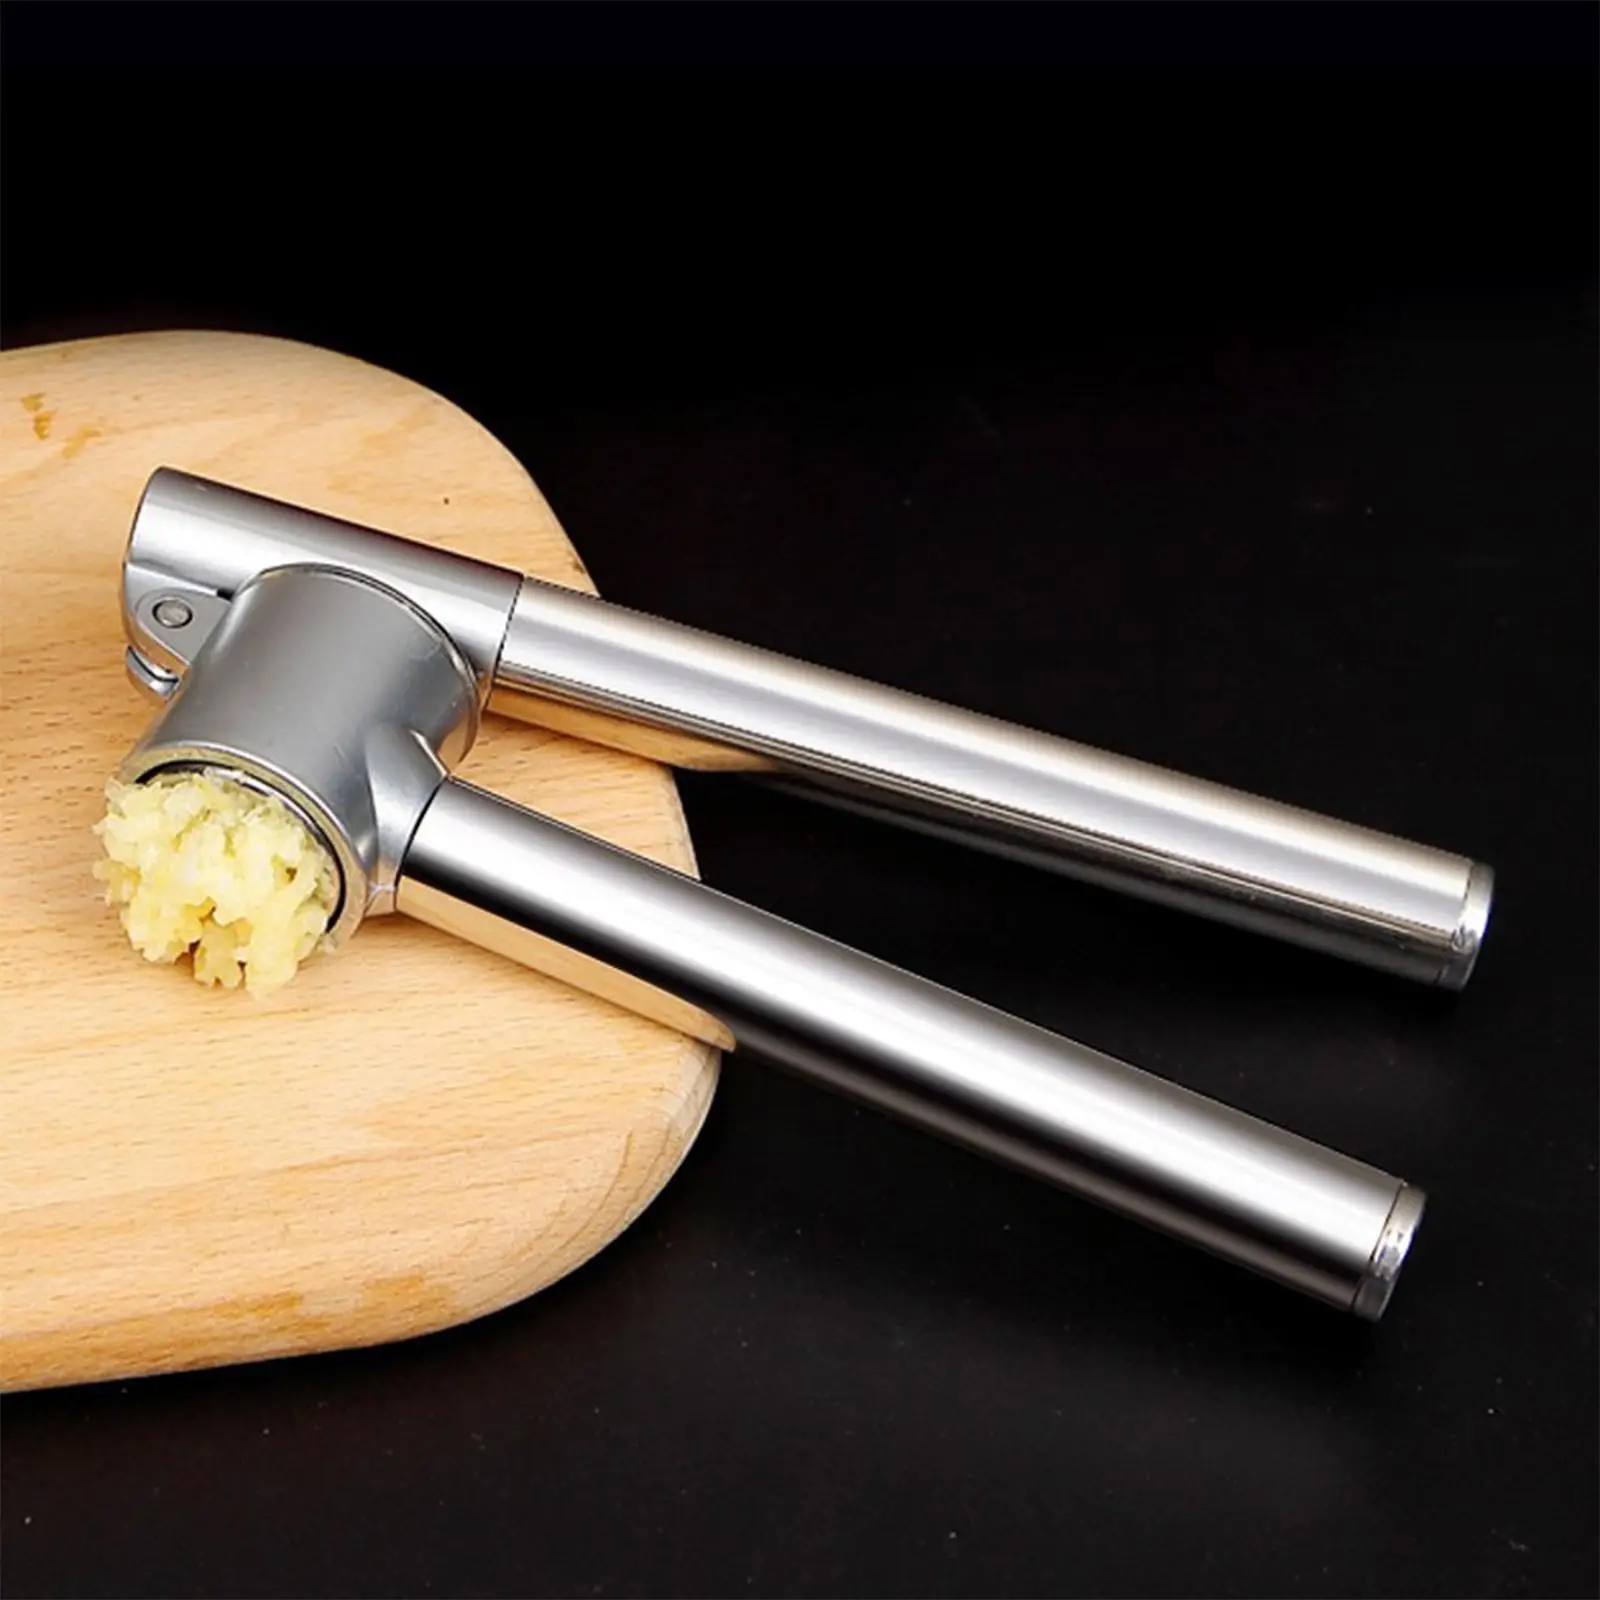 Stainless Steel Garlic Press Mincer Kitchen Tool Sturdy Ginger Mincer Squeezer Masher for Vegetables Nuts Fruits Ginger Carrots